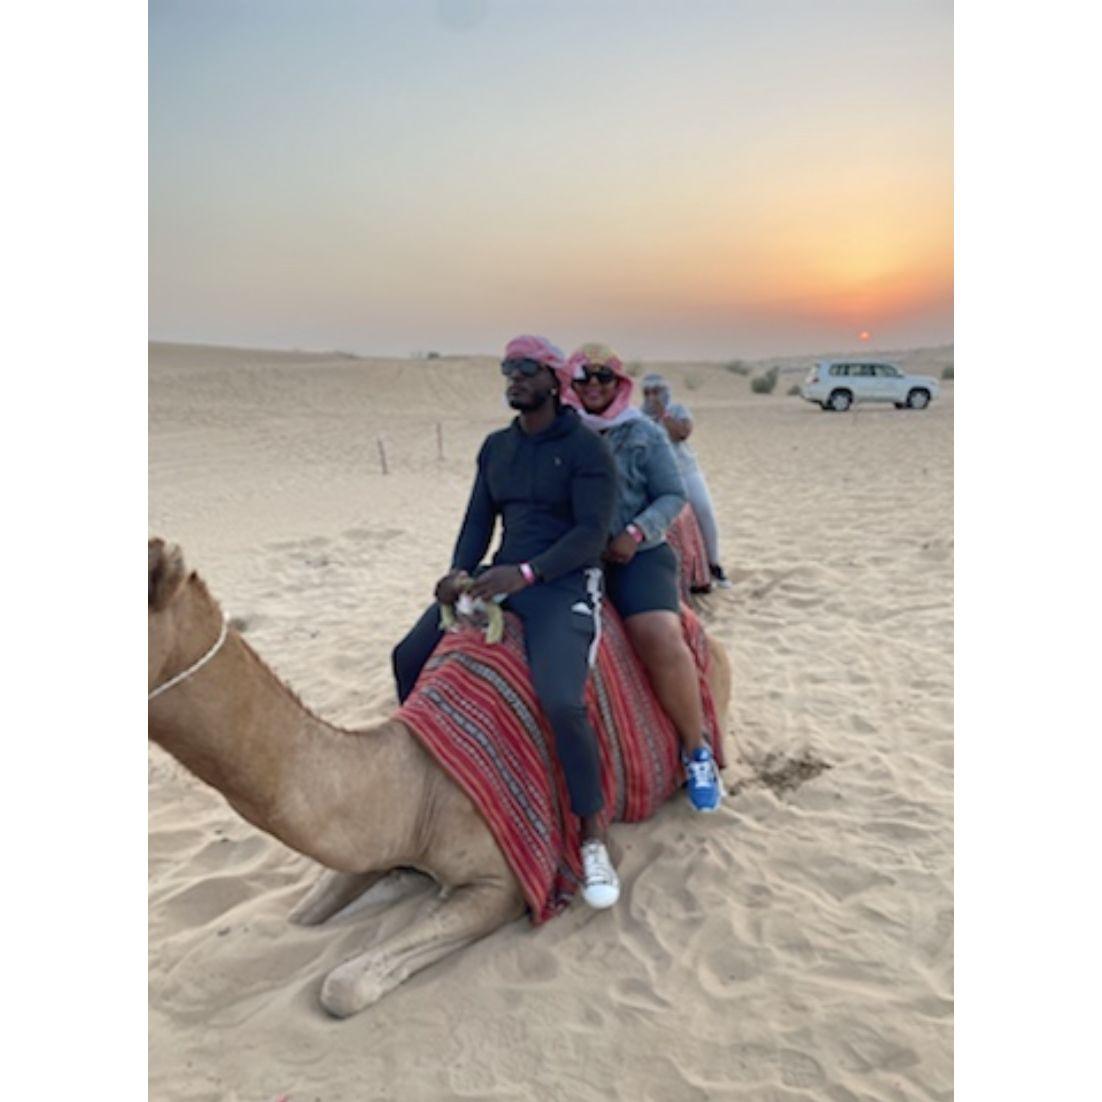 Riding Camels in Dubai